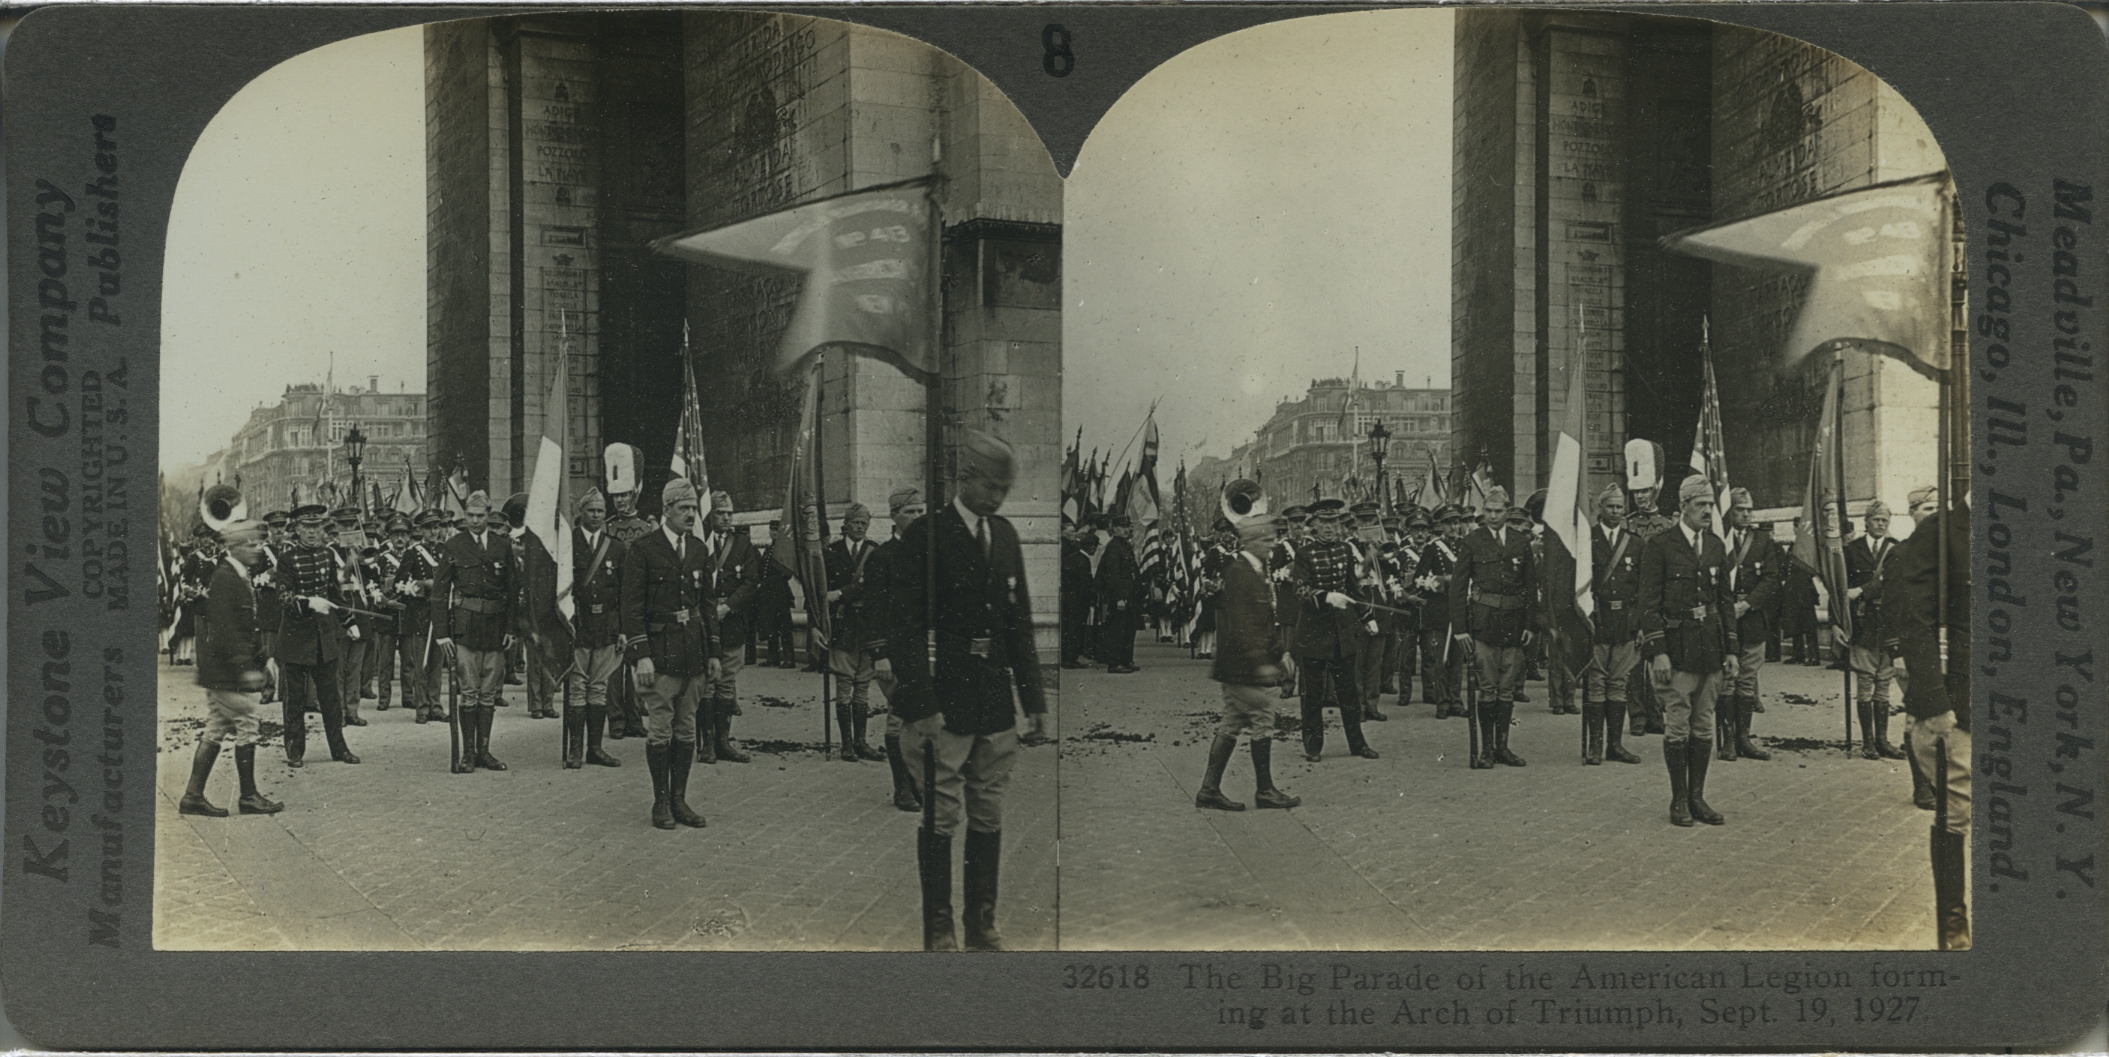 The Big Parade of the American Legion forming at the Arch of Triumph, Sept. 19, 1927.